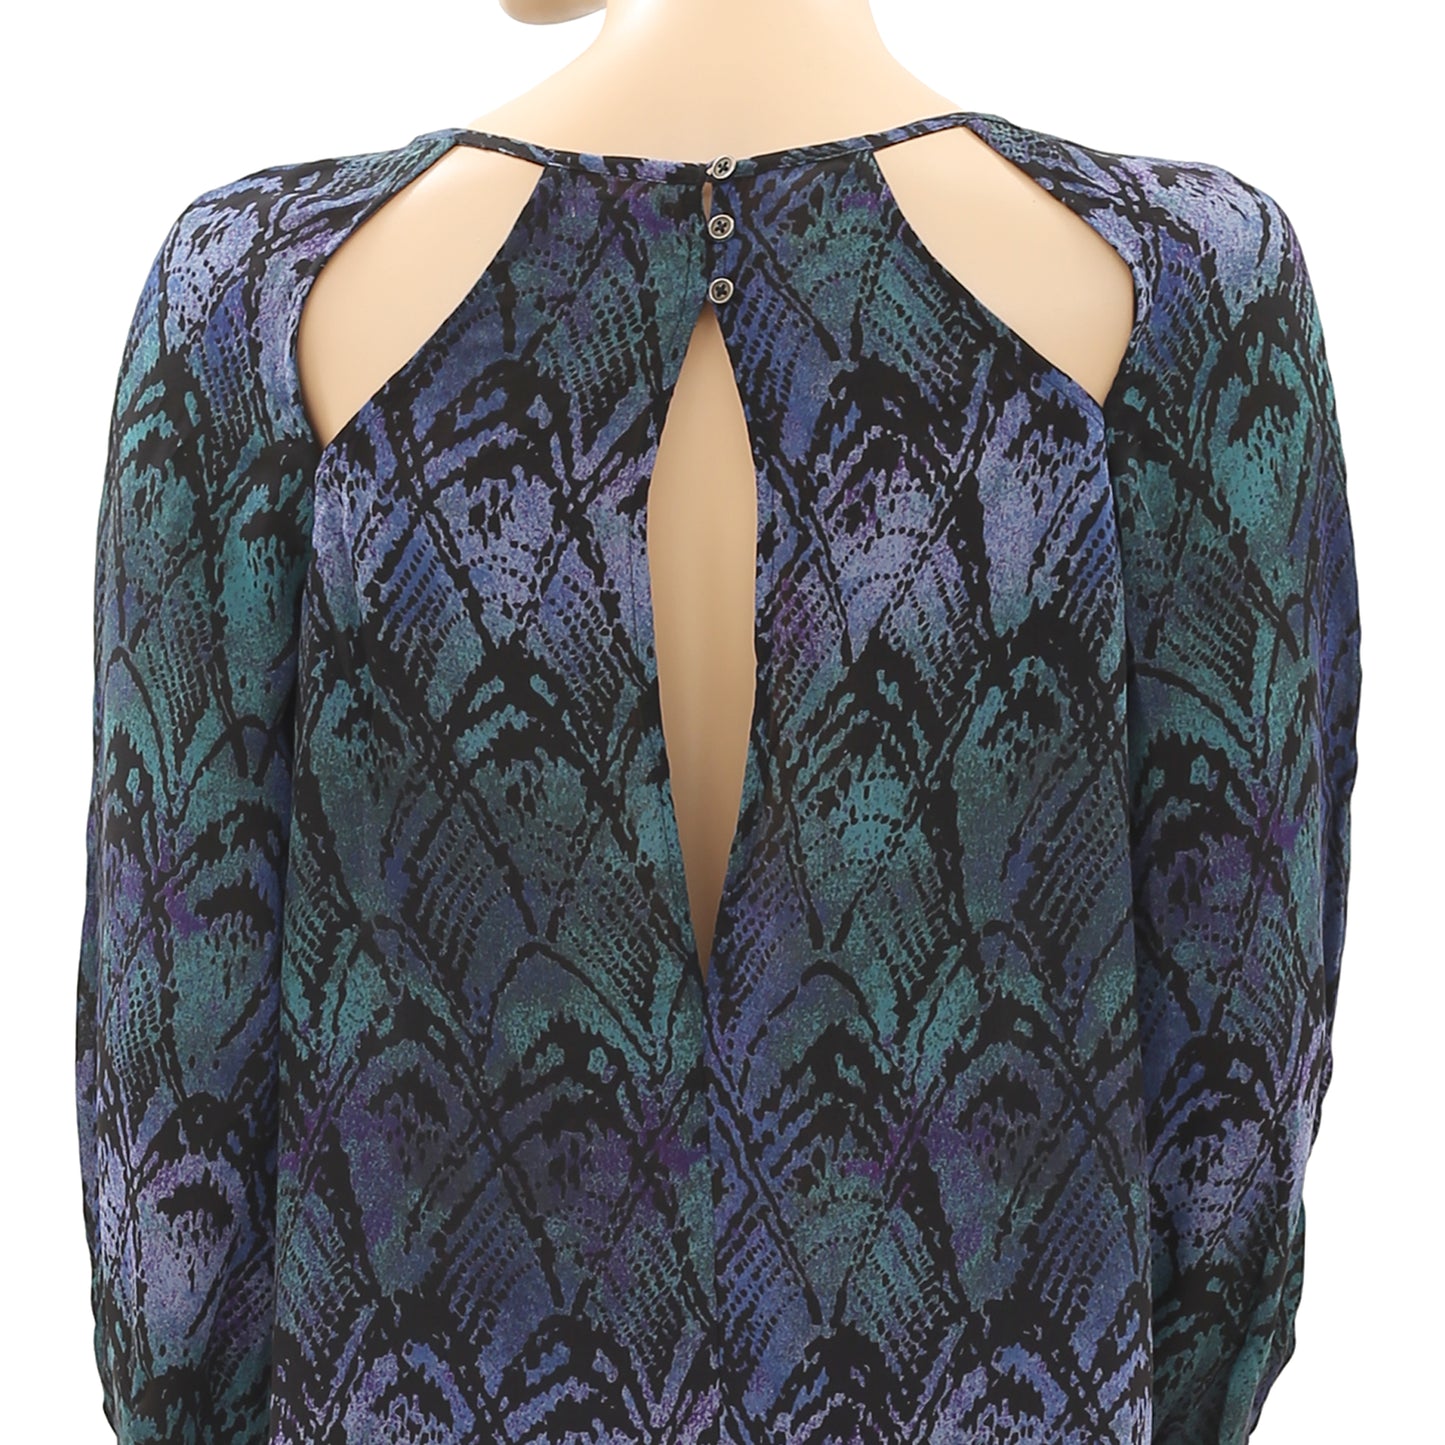 Ecote Urban Outfitters Printed Spliced Blouse Top